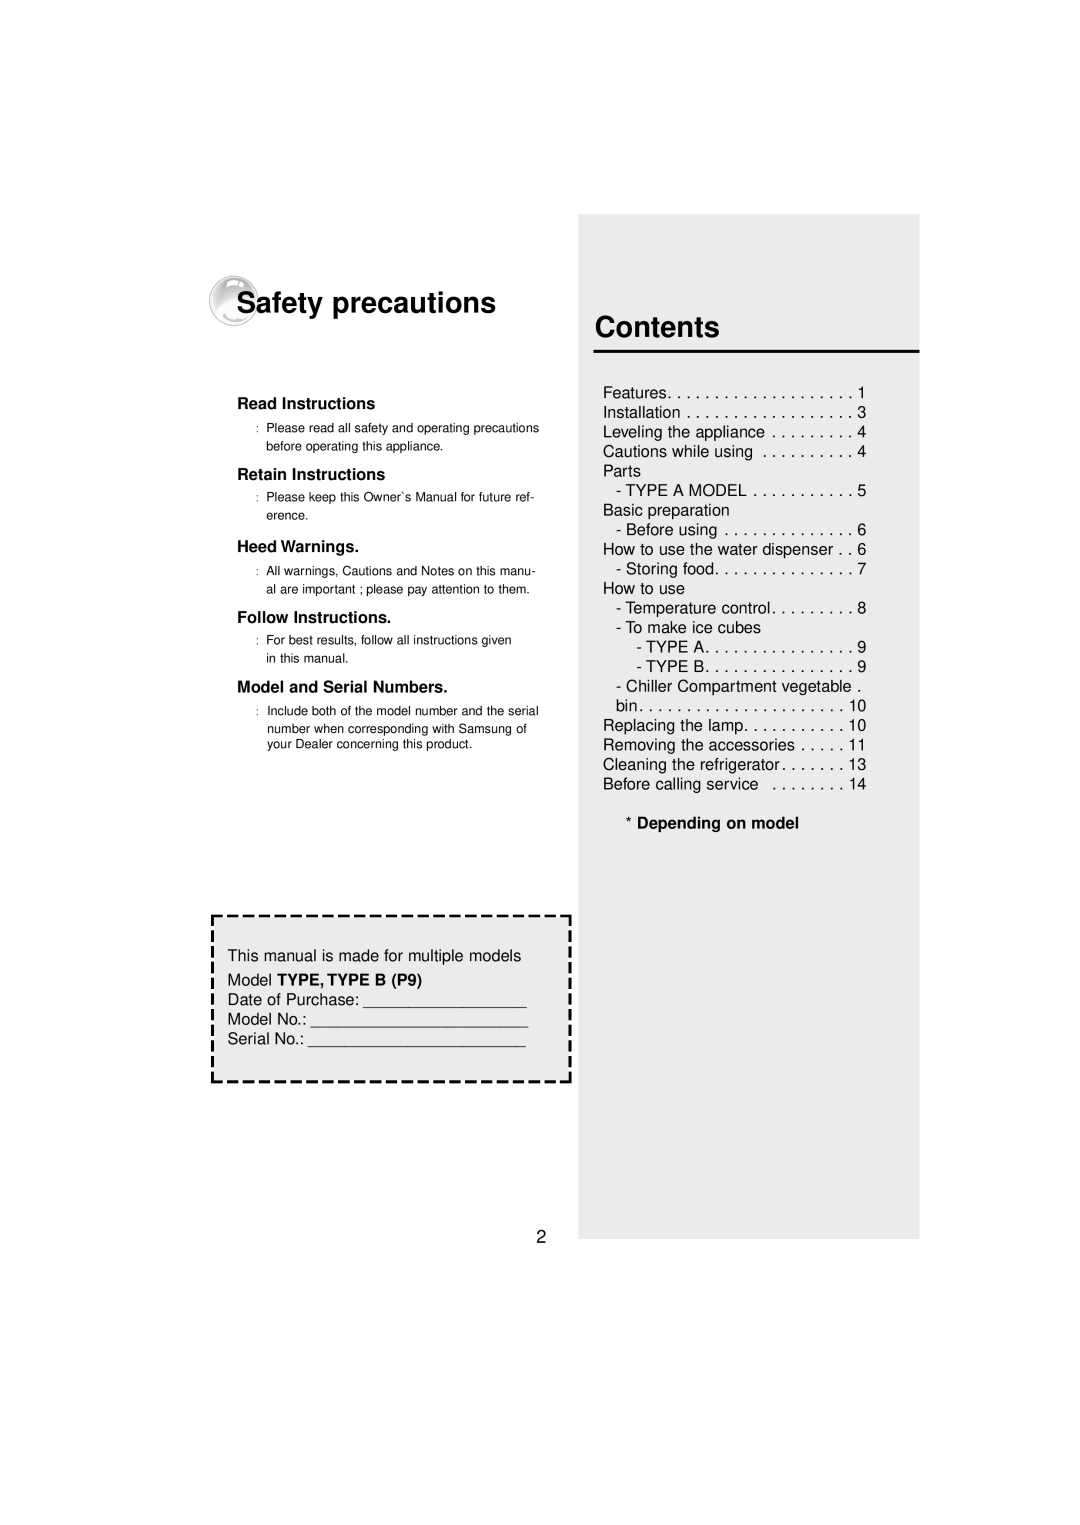 Samsung SR210NME Safety precautions, Contents, Read Instructions, Retain Instructions, Heed Warnings, Follow Instructions 